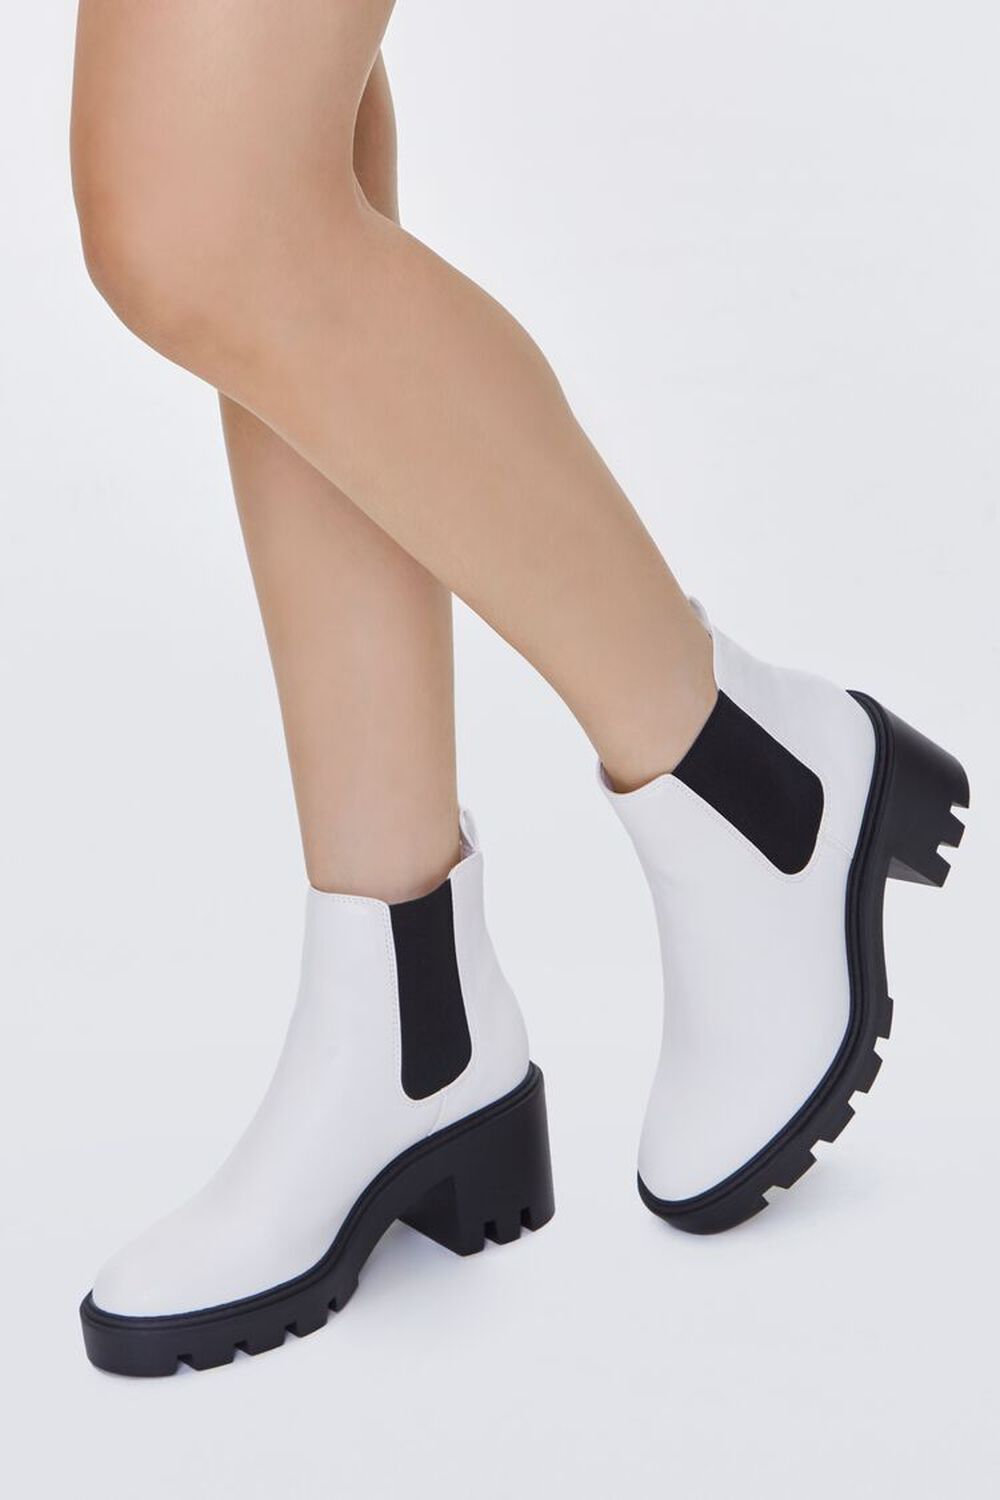 WHITE Faux Leather Chelsea Booties, image 1